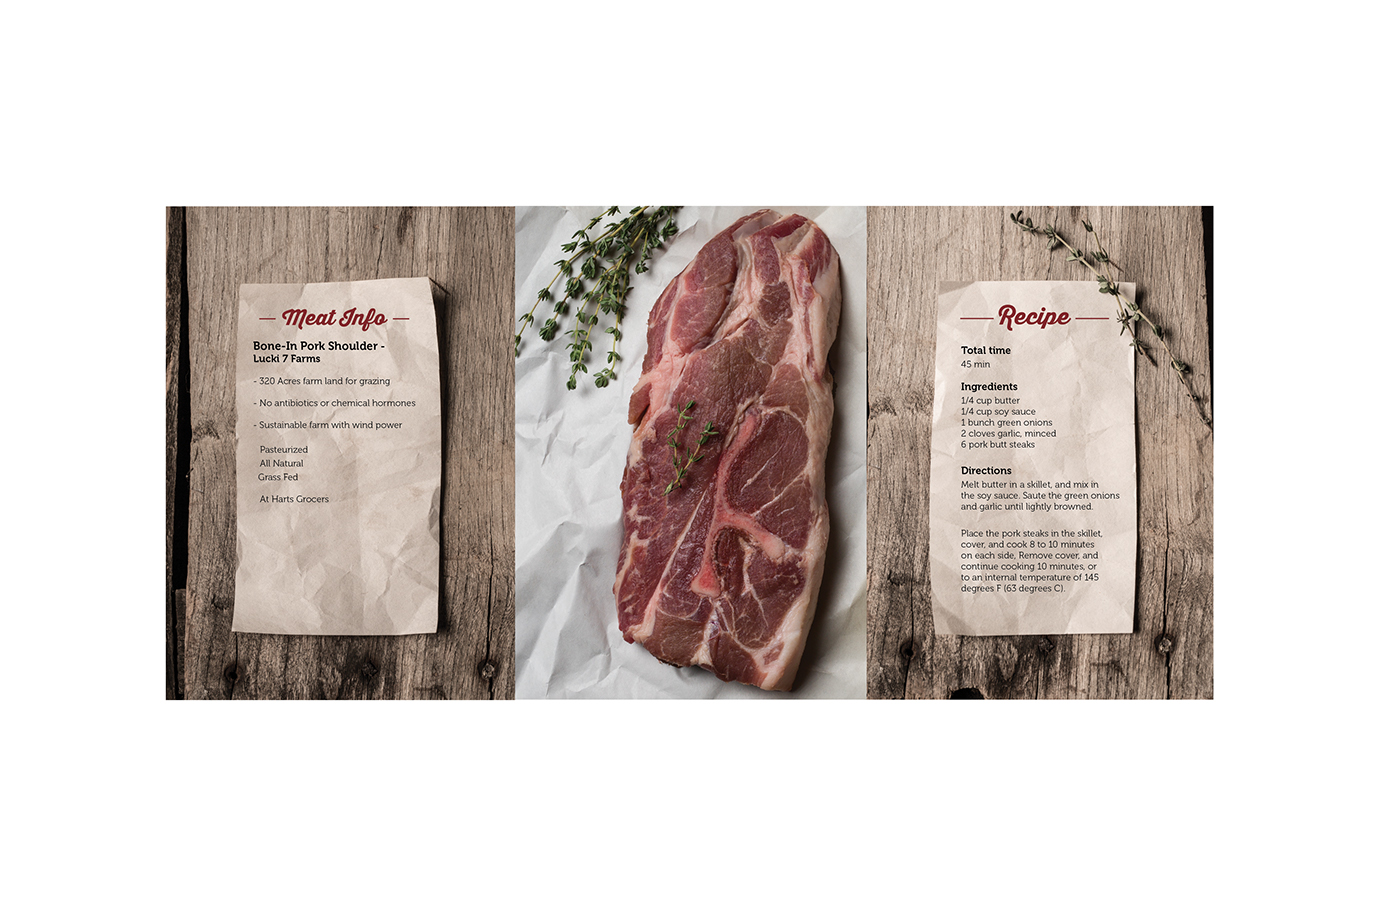 meat mailer Grocery fresh farm local enviornment steak RibEye pork RawMeat specialized rochester farm to table